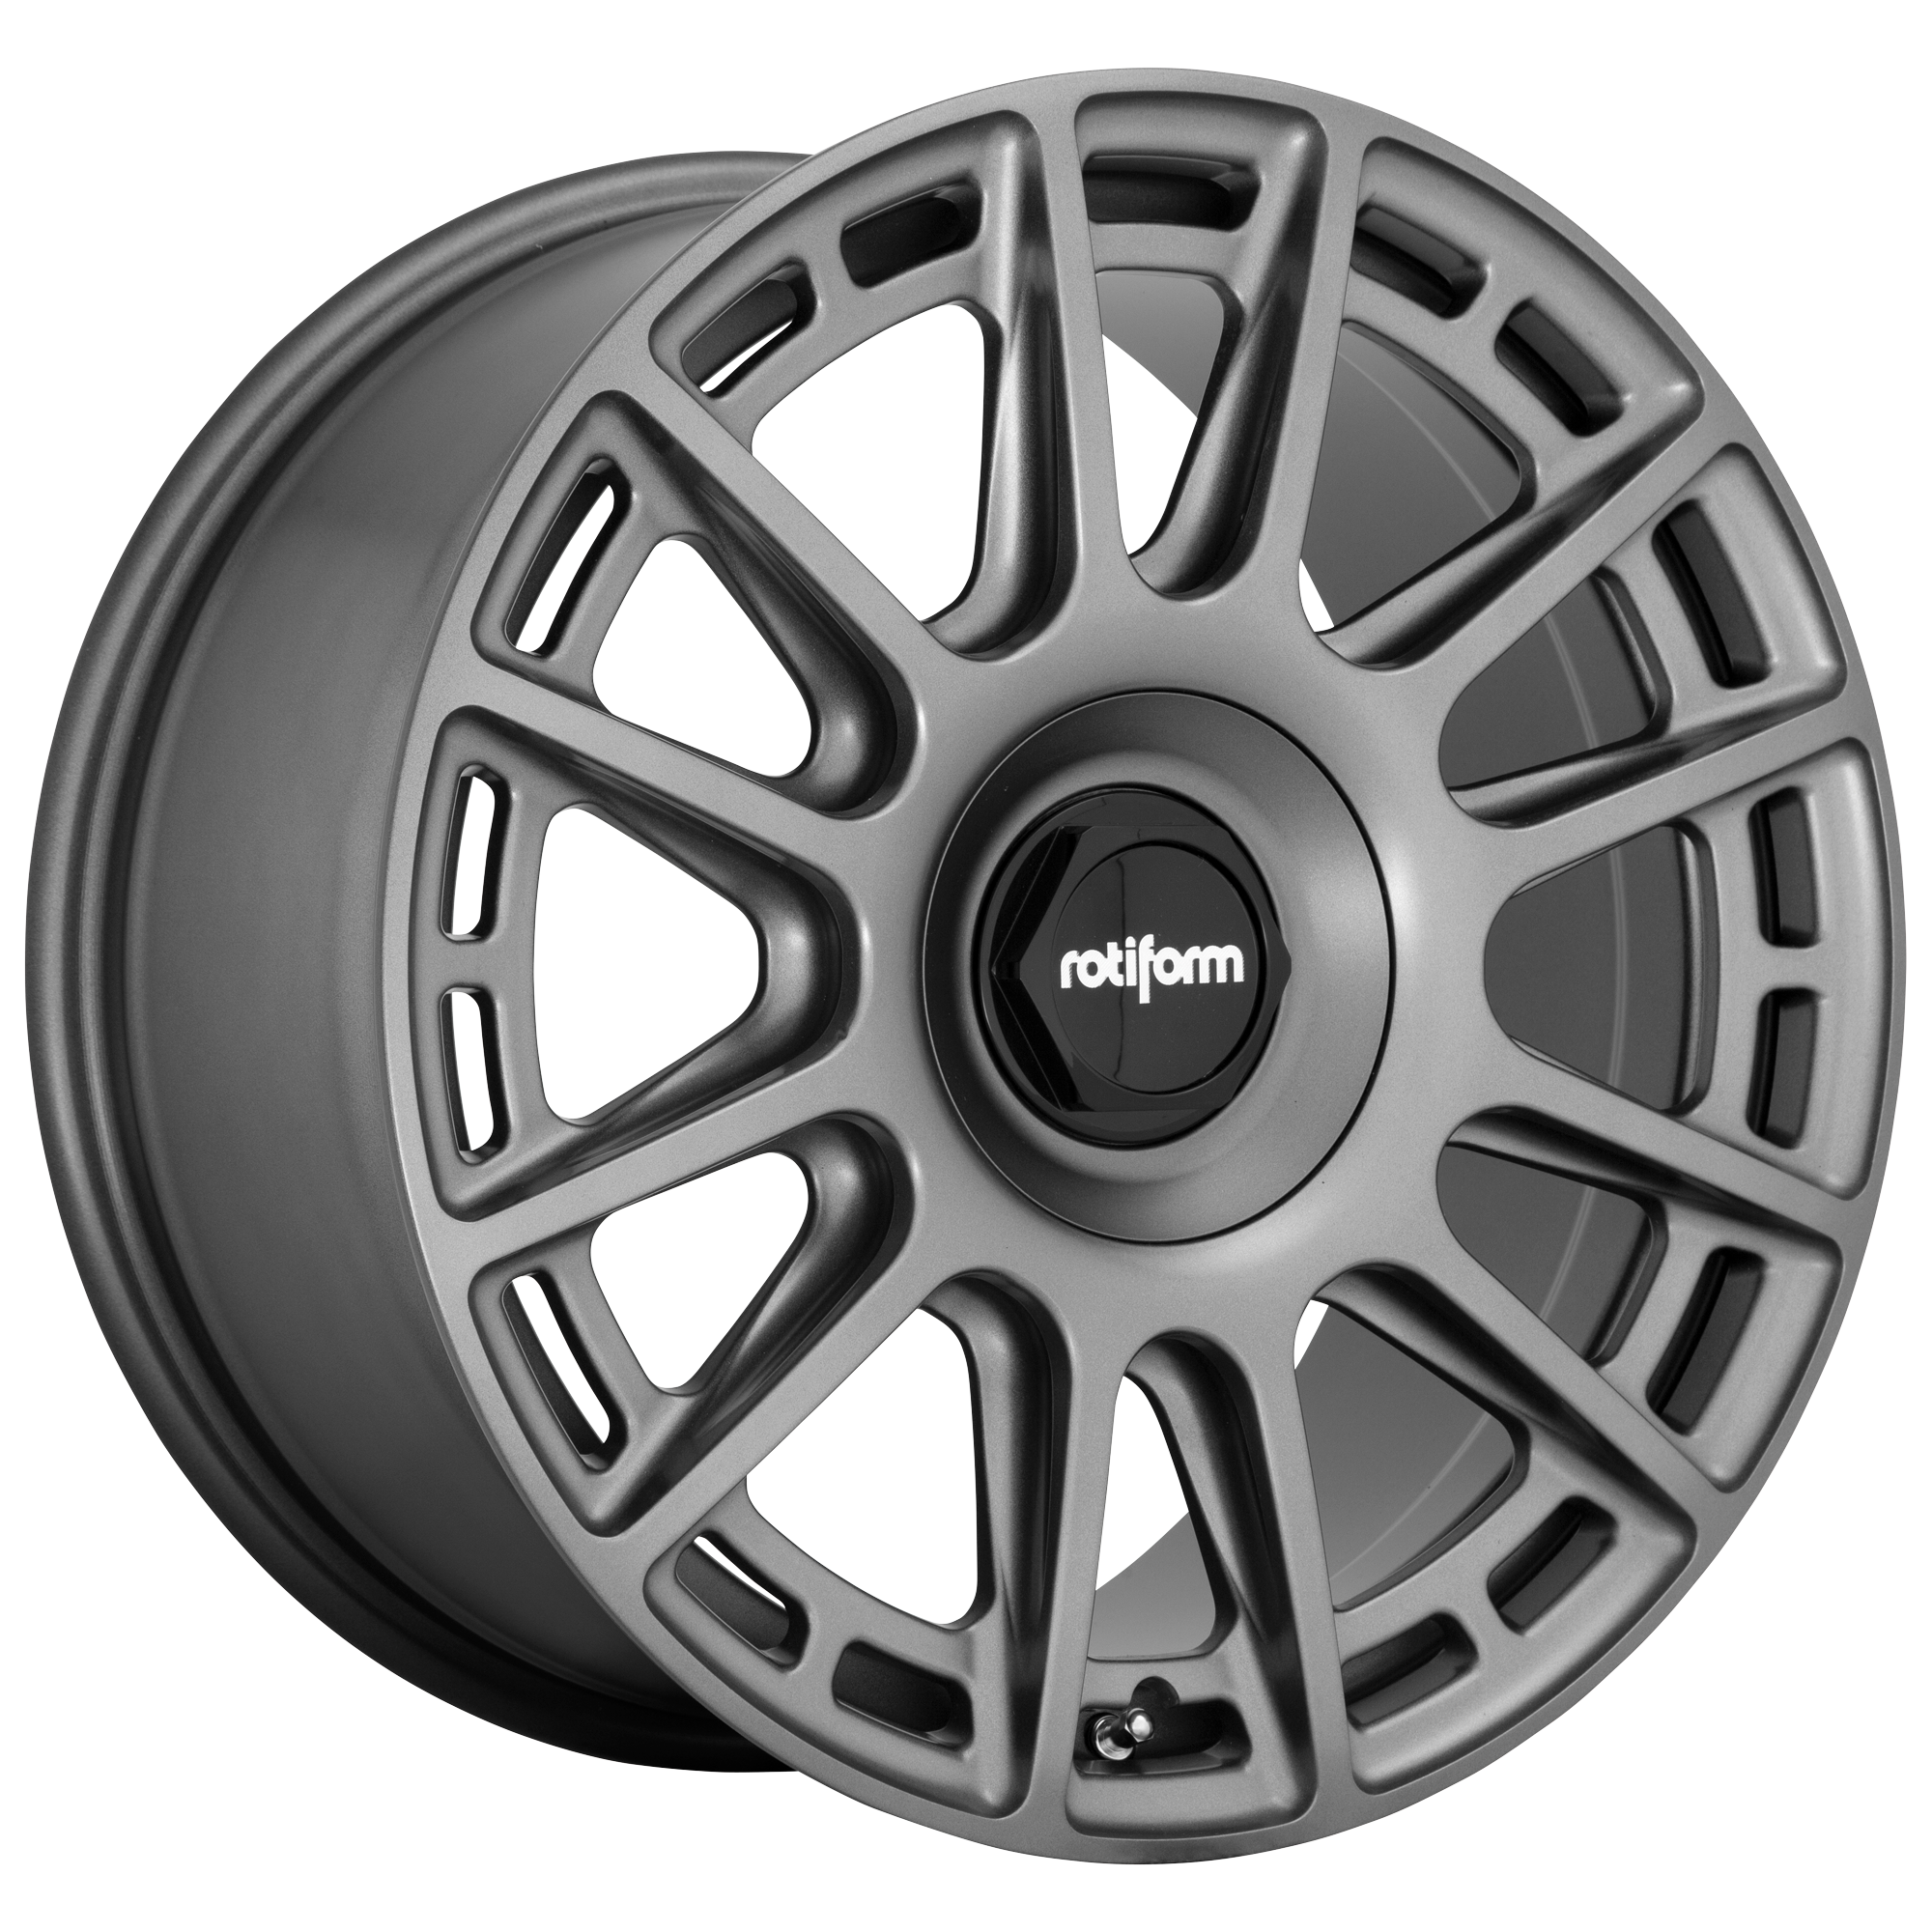 OZR 18x8.5 5x100.00/5x114.30 MATTE ANTHRACITE (35 mm) - Tires and Engine Performance